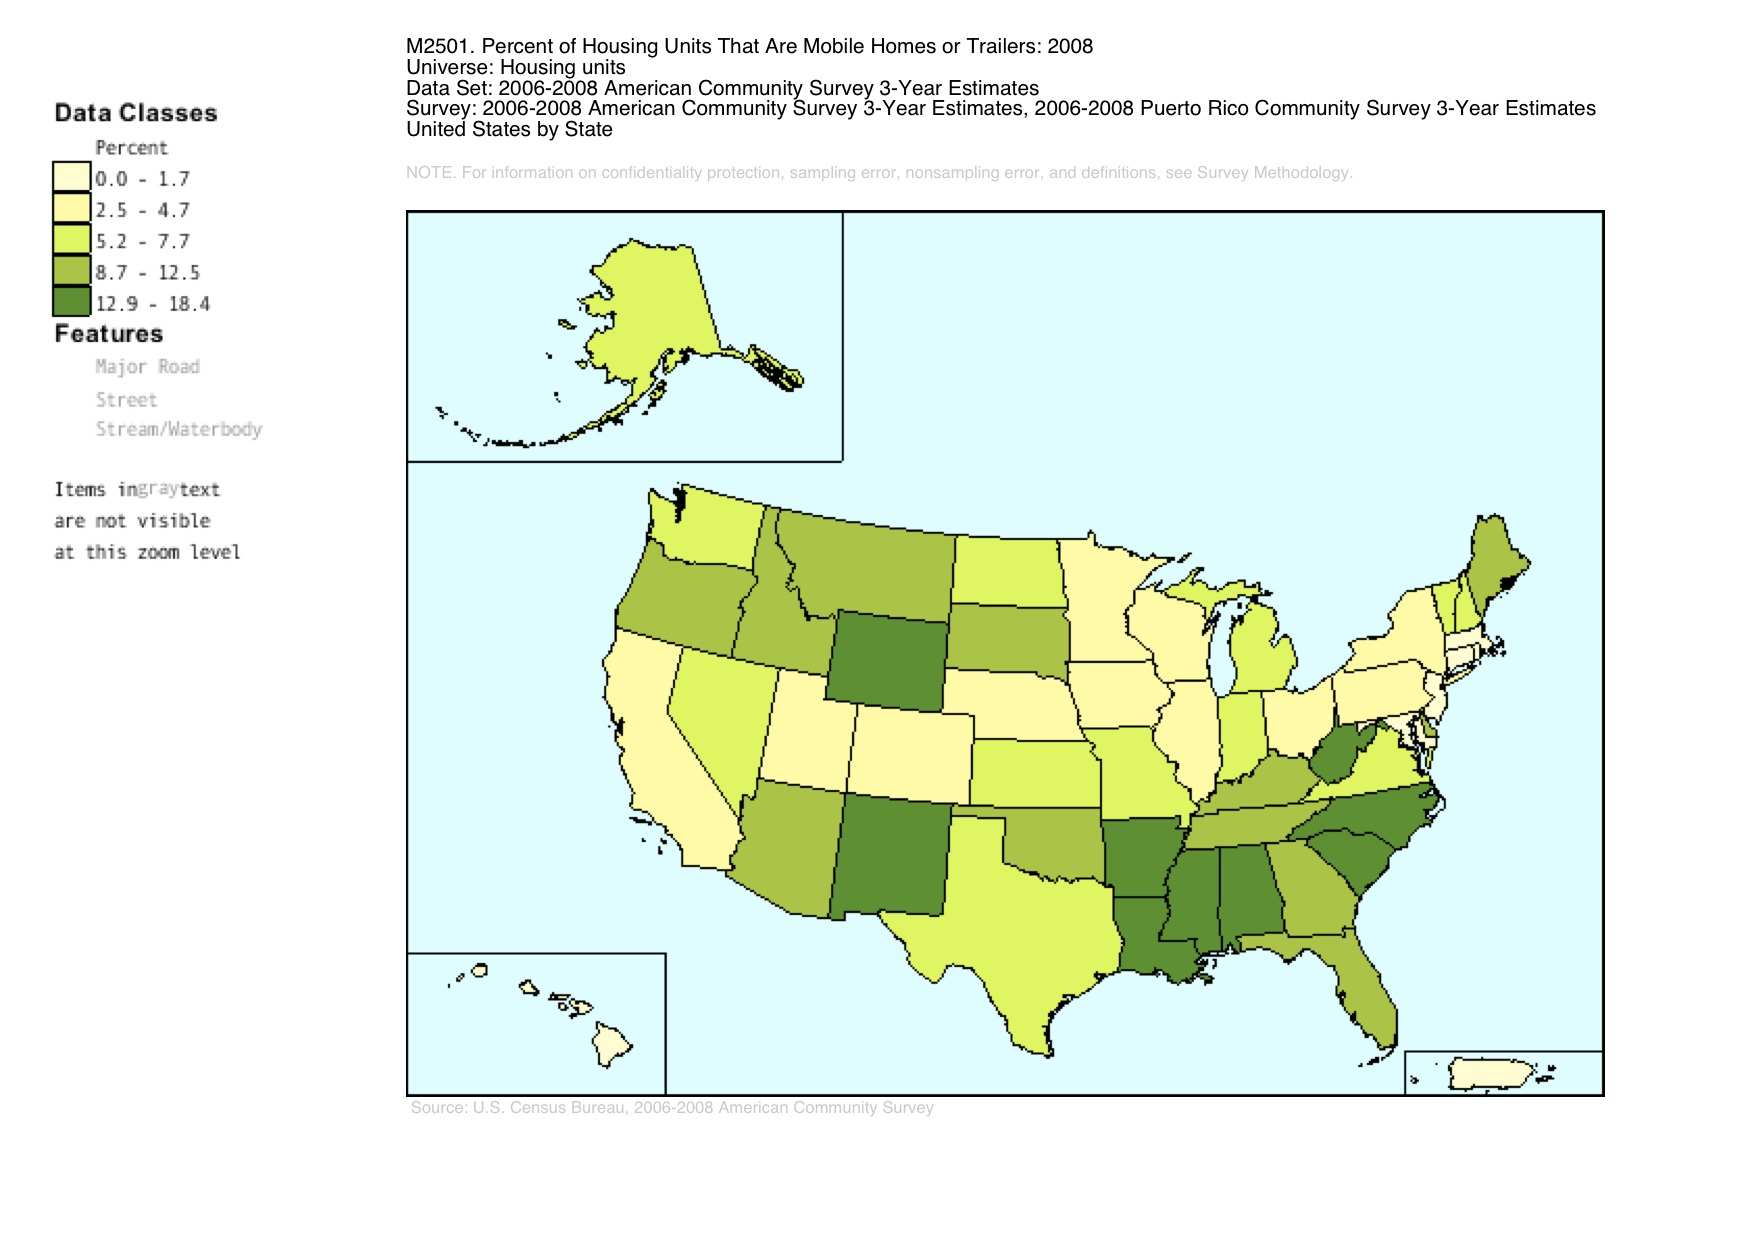 Mobile Home Density by State via American Community Survey, 2006-2008.